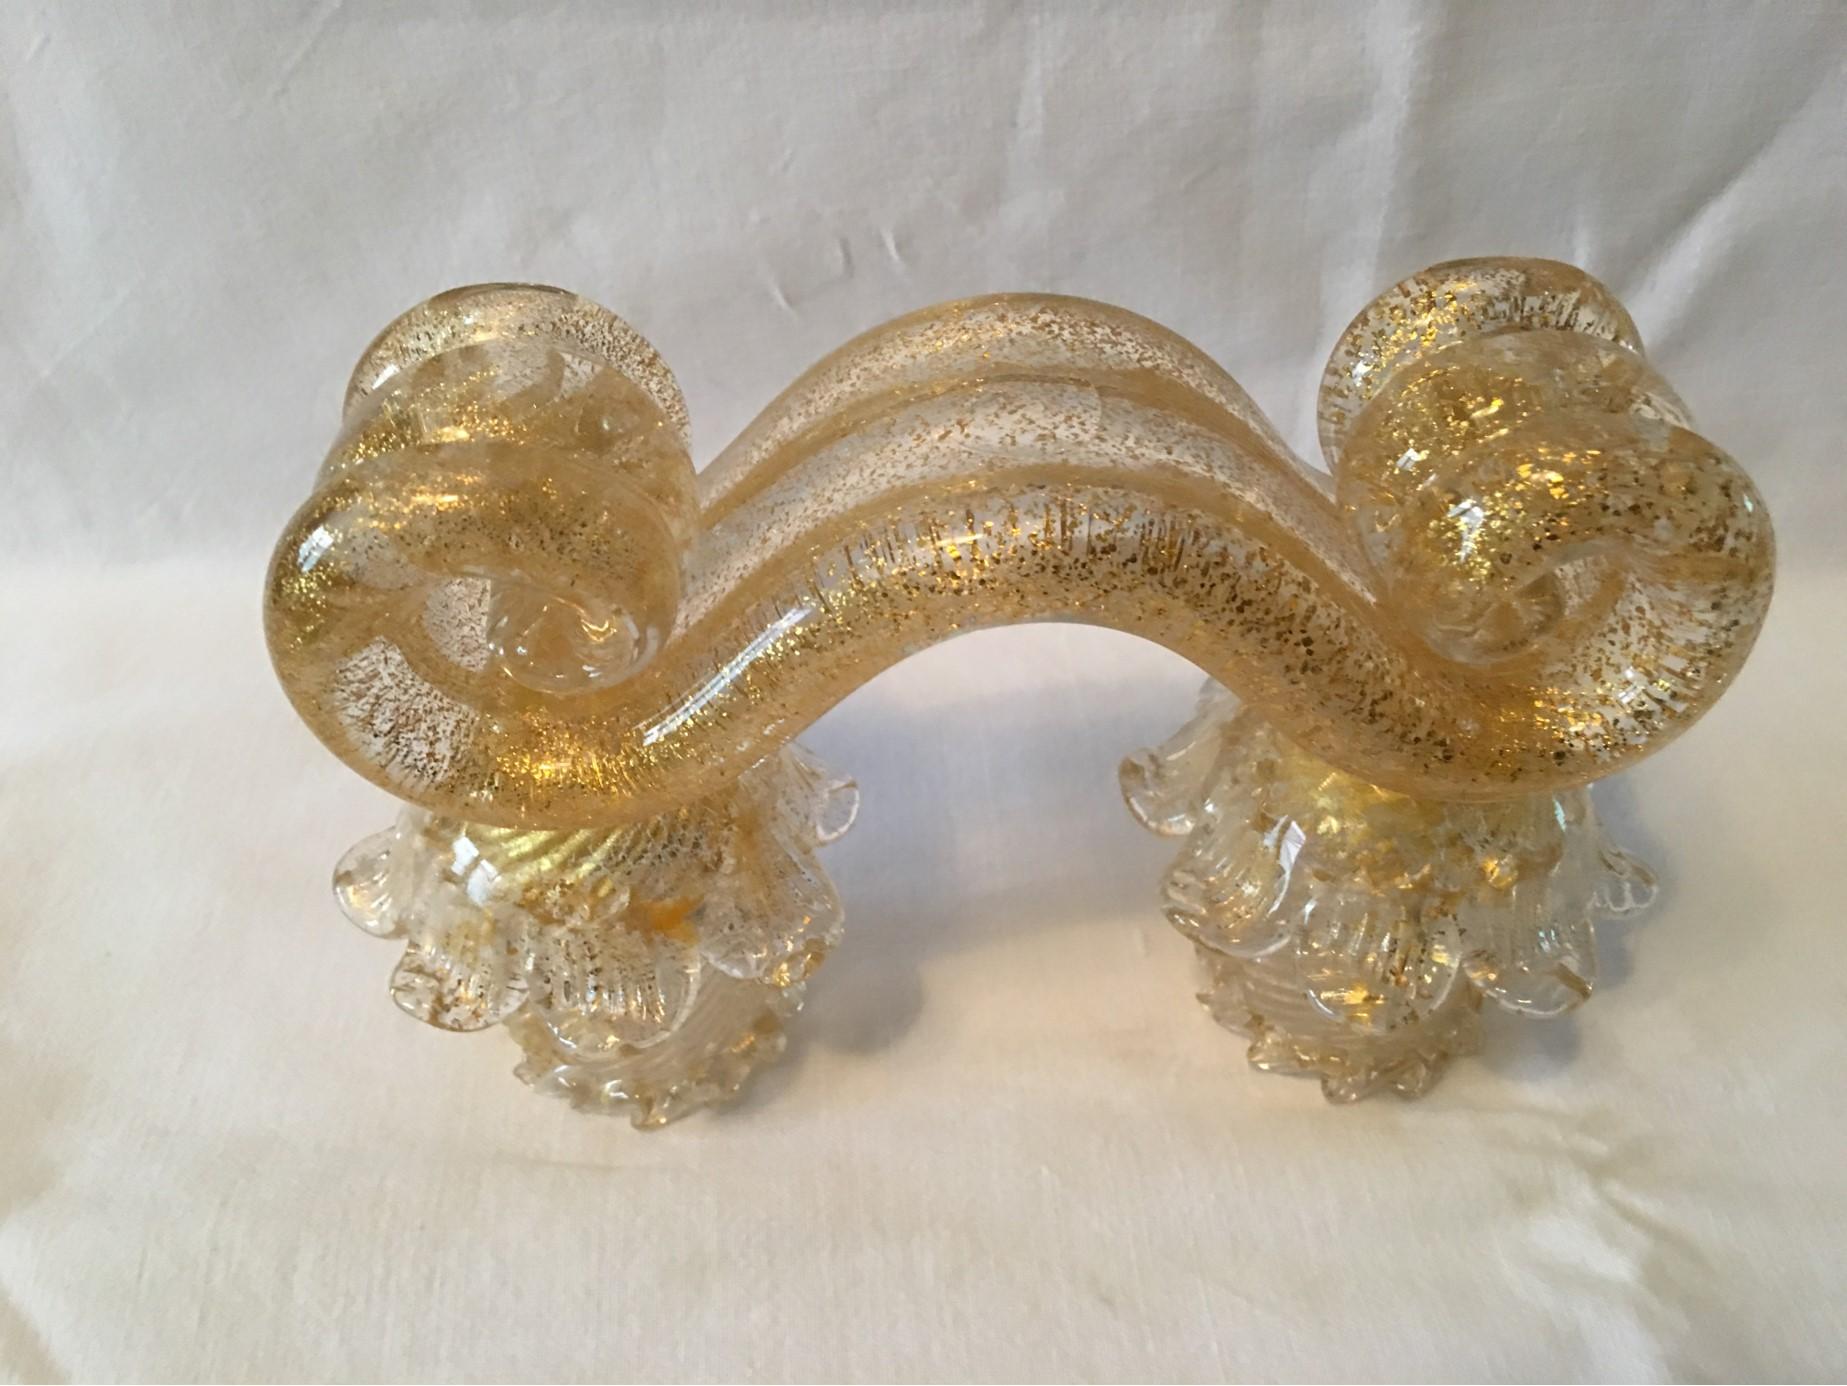 Murano Gold Flake Glass Candleholder Barovier e Toso Style, 1950s For Sale 1